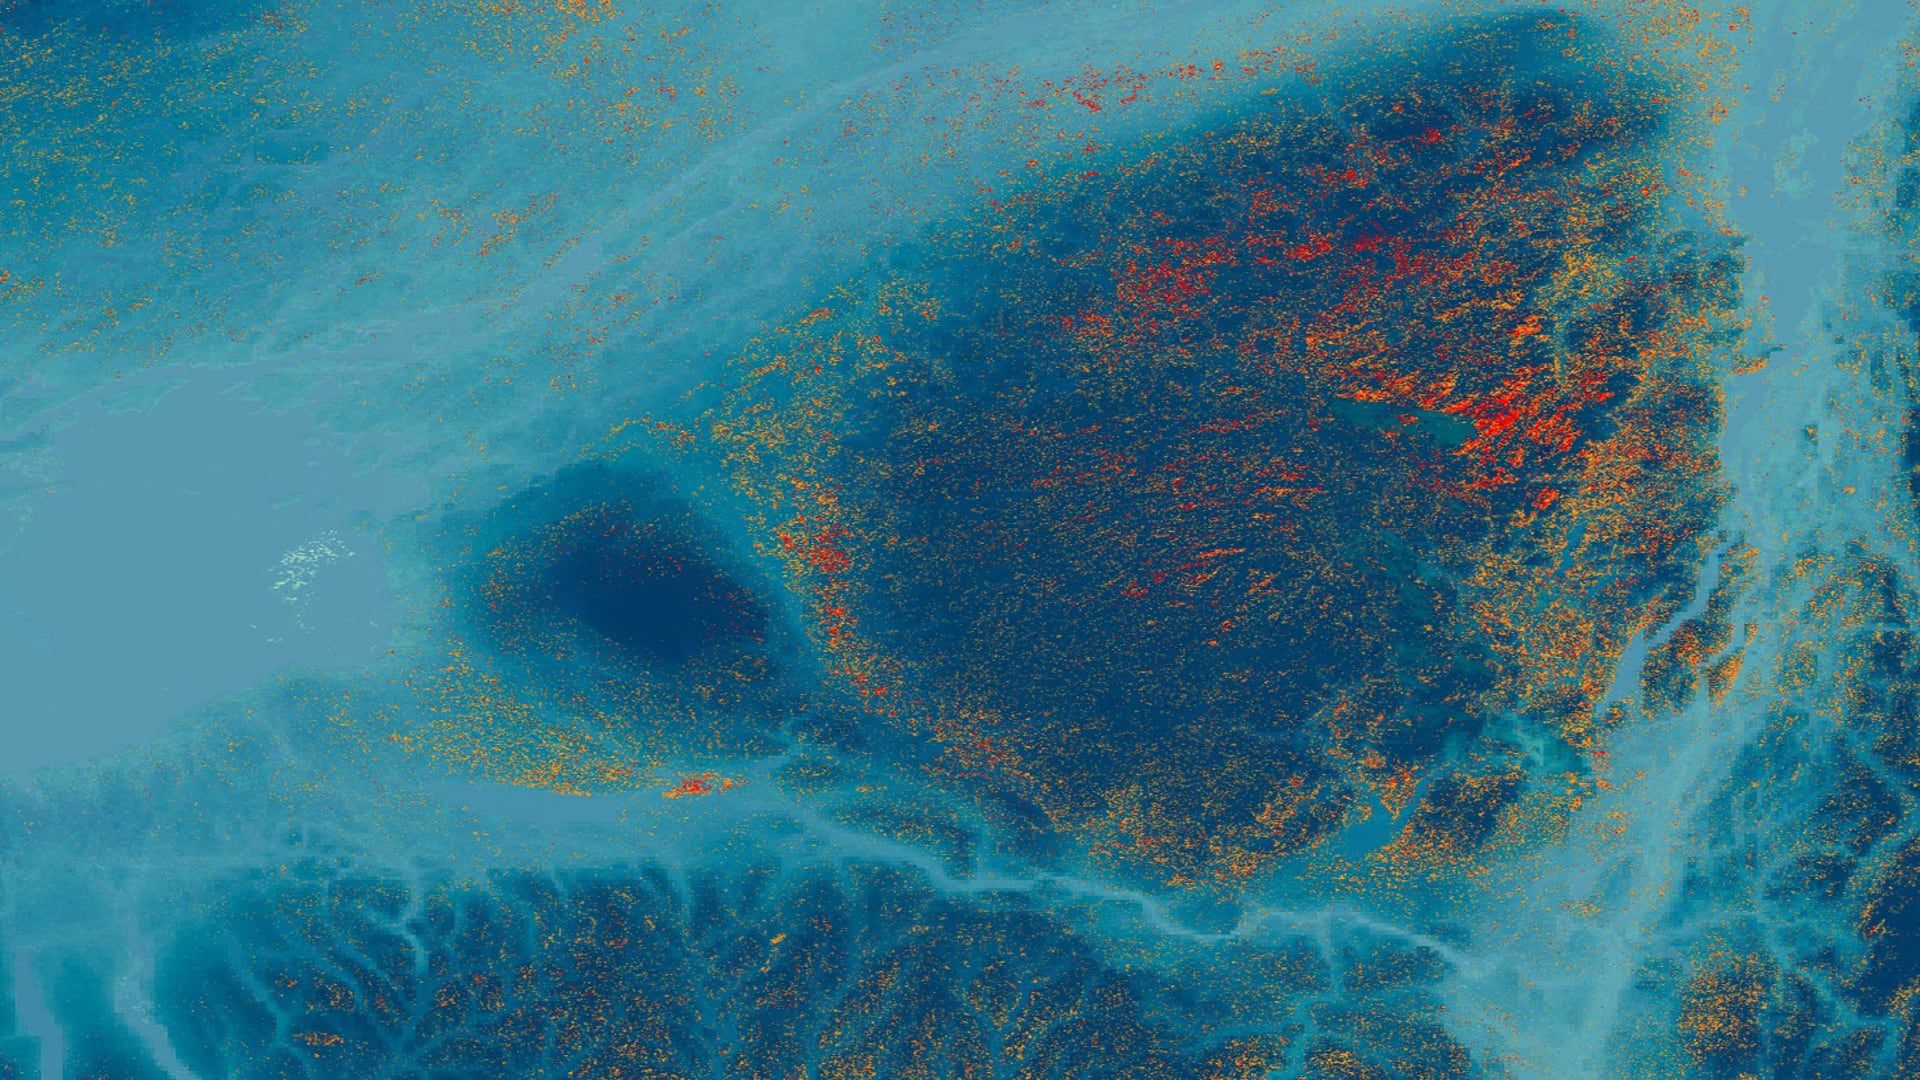 False color composite (bands 5, 4, and 3) of recent (2016 to 2019) leaf-off vegetation in the New York Adirondacks region processed using Landsat 8 OLI data overlaid with the HydroSHEDS Hydrologically Conditioned DEM from the World Wildlife Fund (2000) in cyan. Pure eastern hemlock stands are indicated in red and hemlock-dominant stands are indicated in orange. Areas of pure eastern hemlock should be the primary focus of land managers’ conservation efforts against the invasive hemlock woolly adelgid.